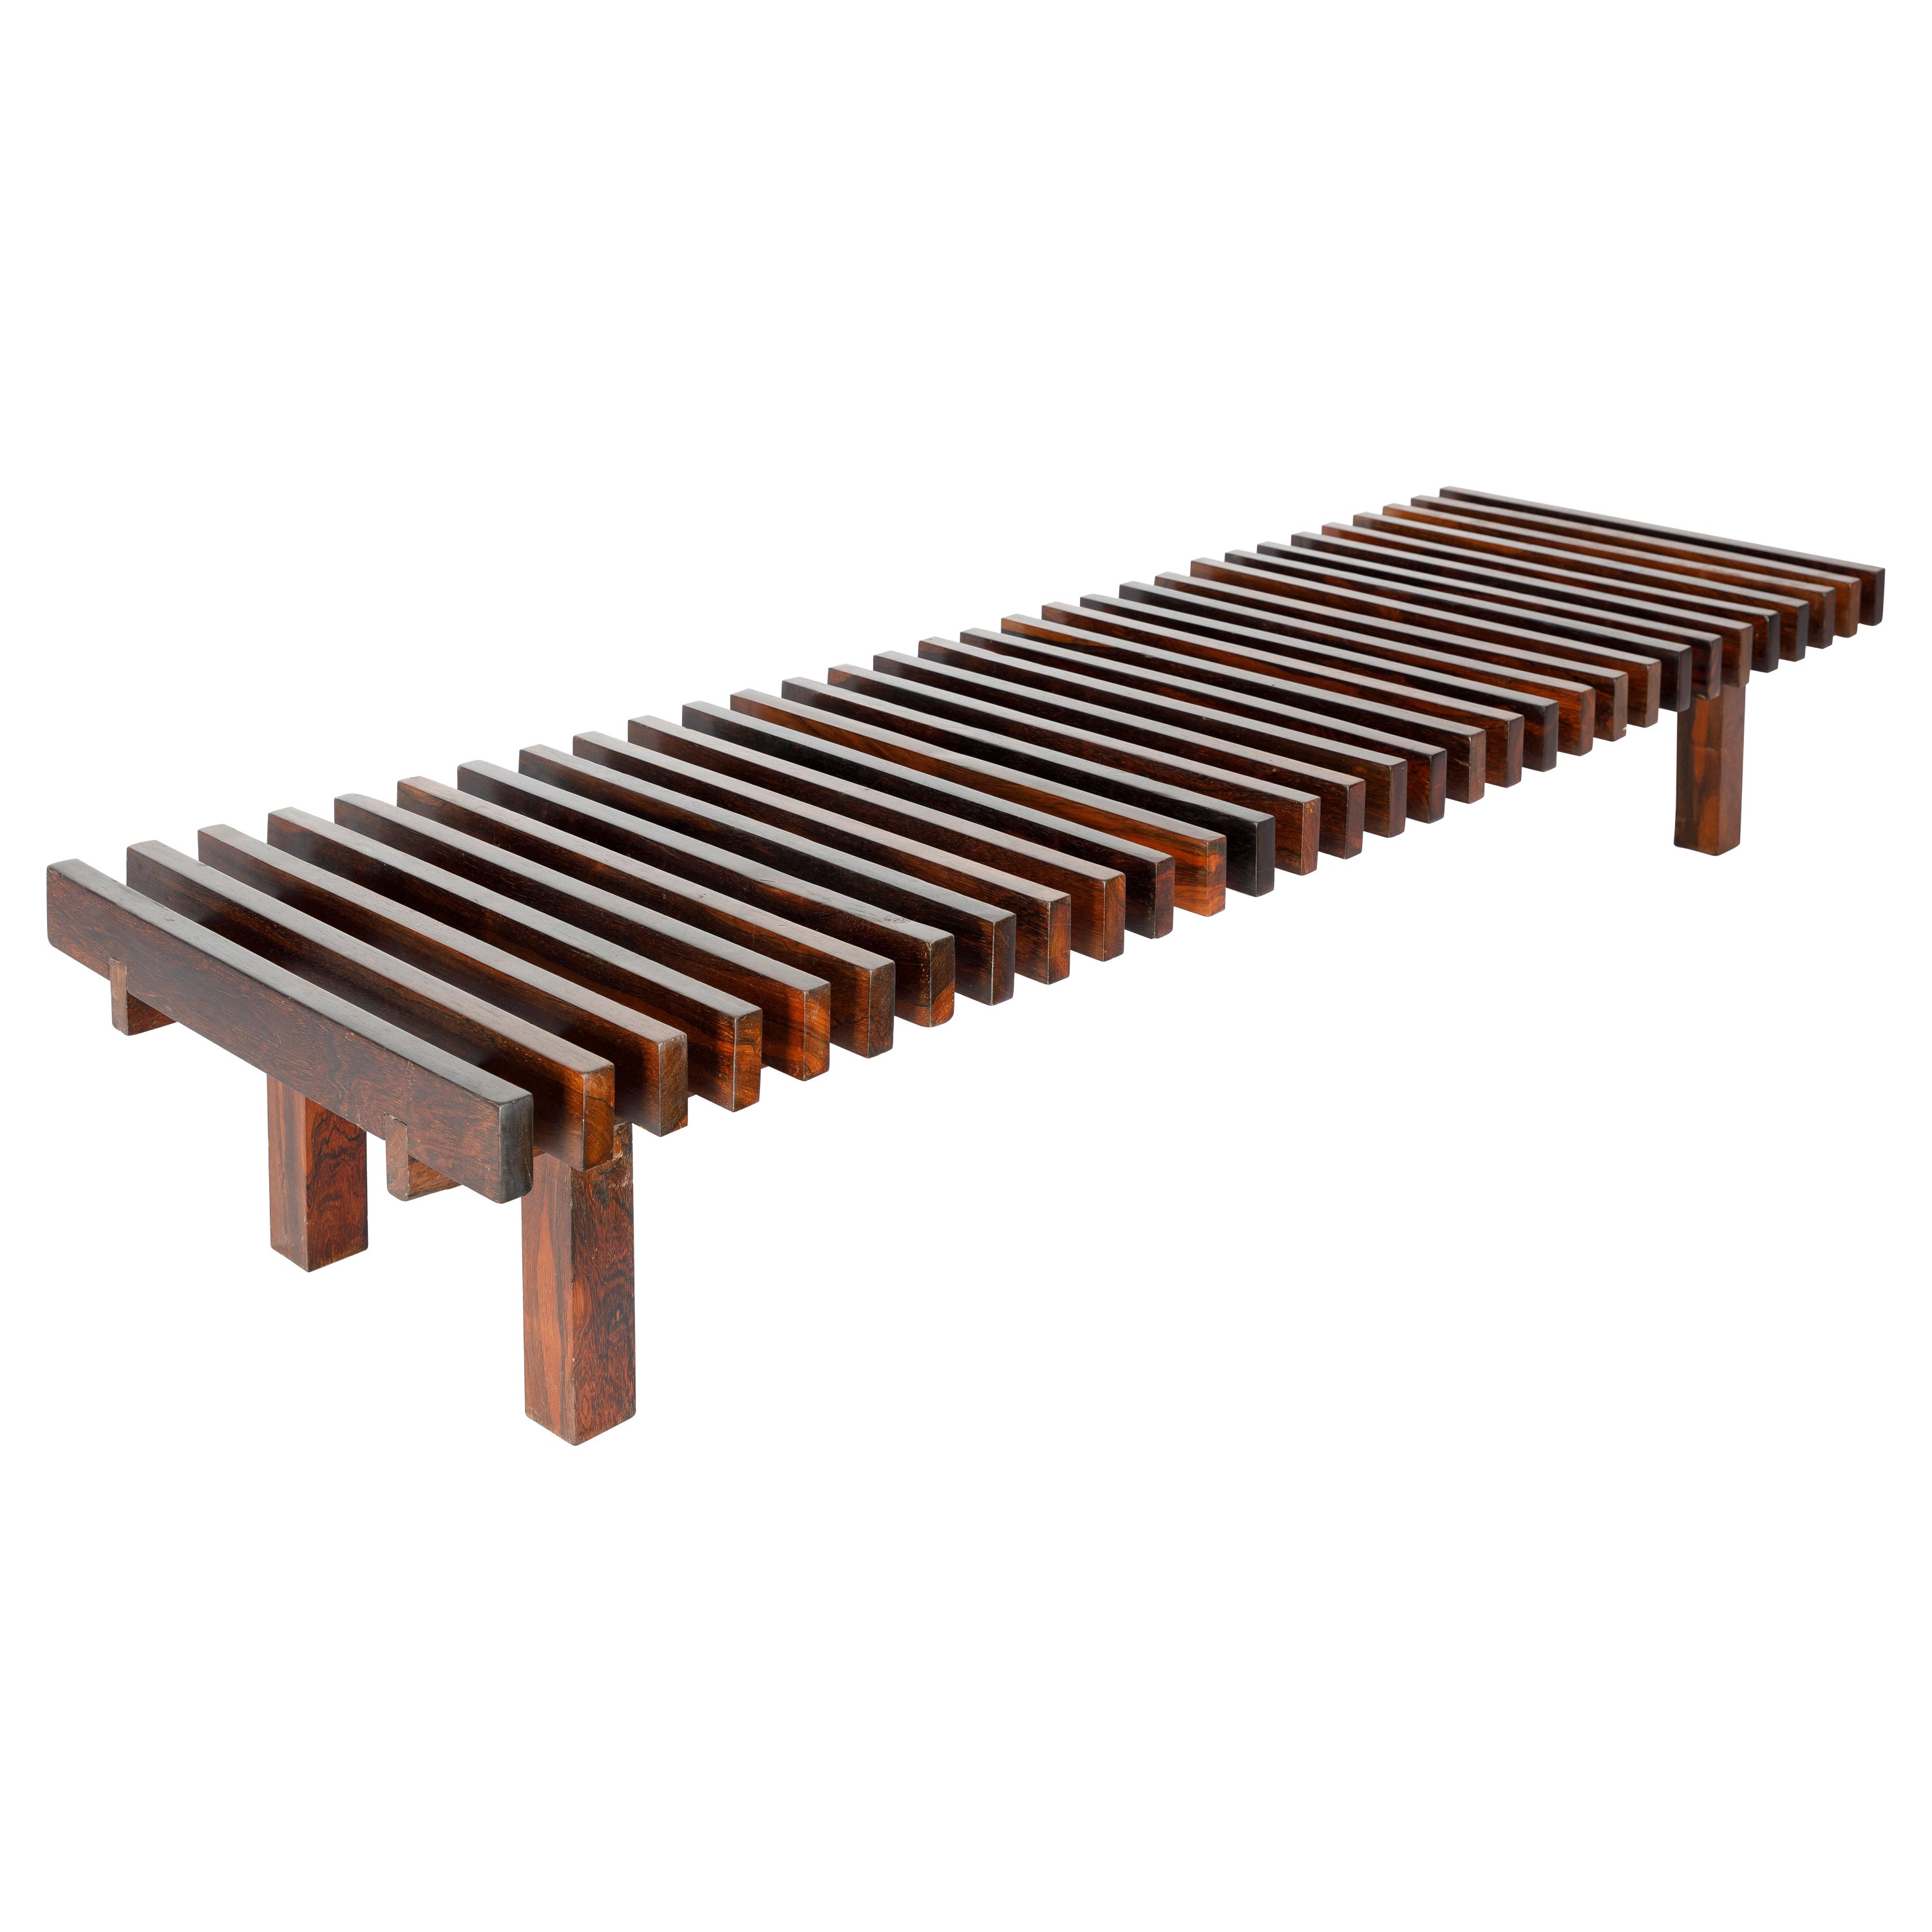 Mid-Century Modern Slatted Bench from Forma Manufacture, Brazil, 1970s For Sale